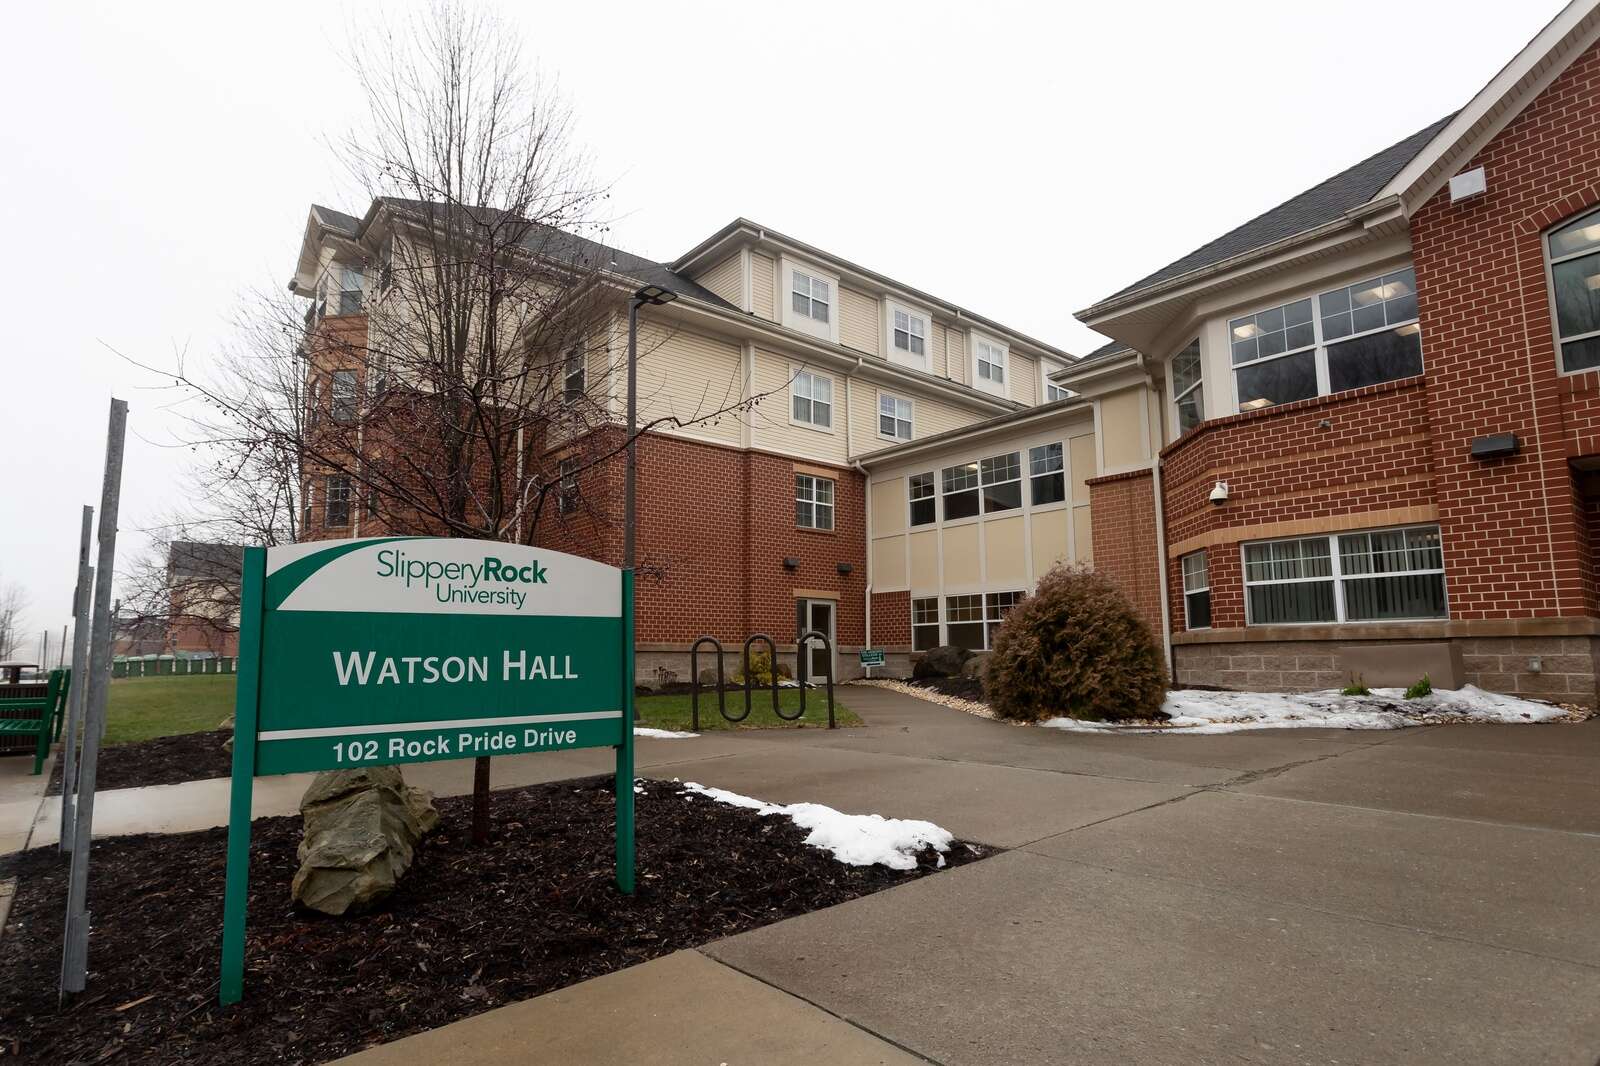 Watson Hall is on the campus of Slippery Rock University